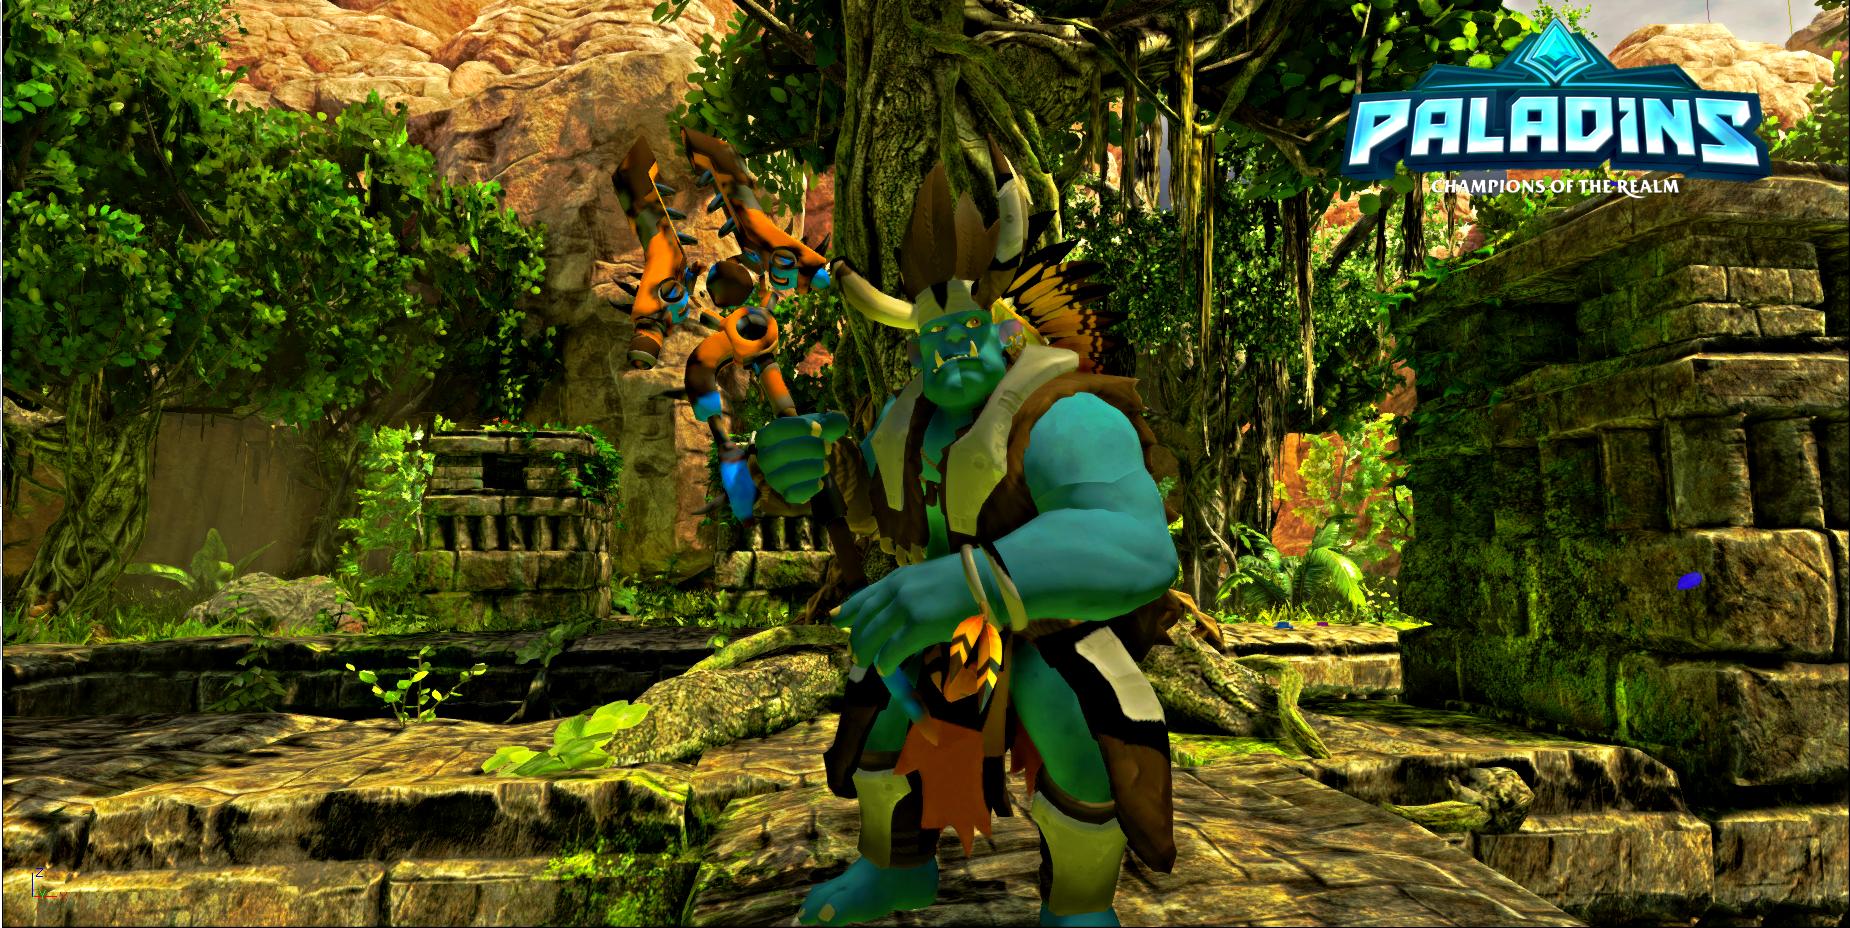 paladins wallpaper hd,action adventure game,pc game,adventure game,jungle,games